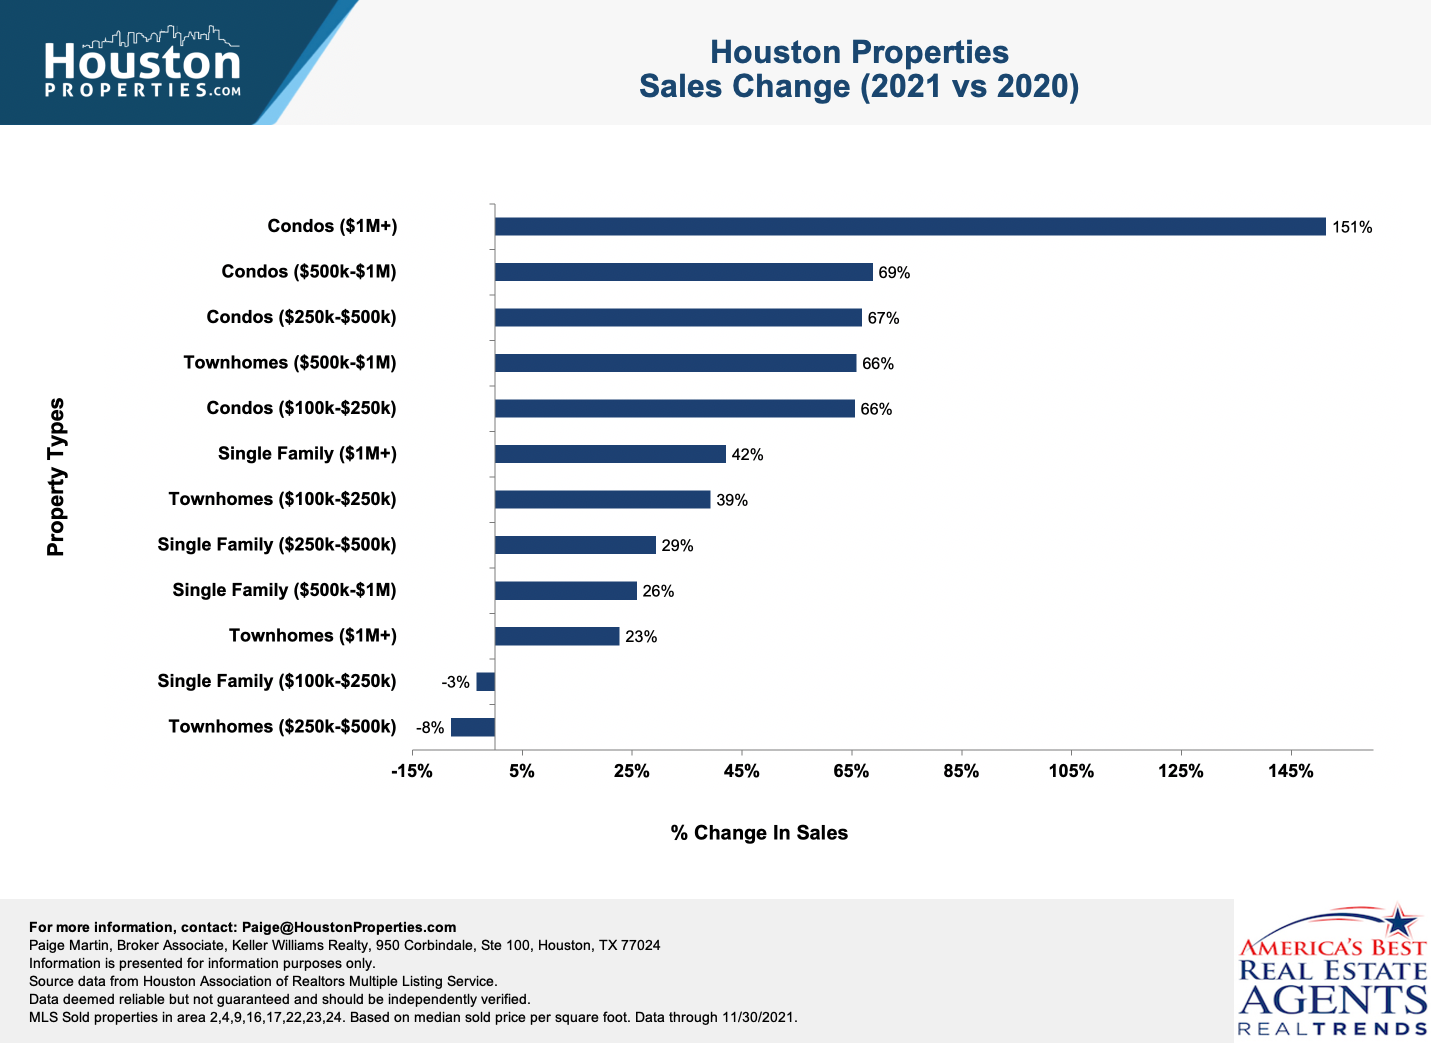 Houston home sales changes